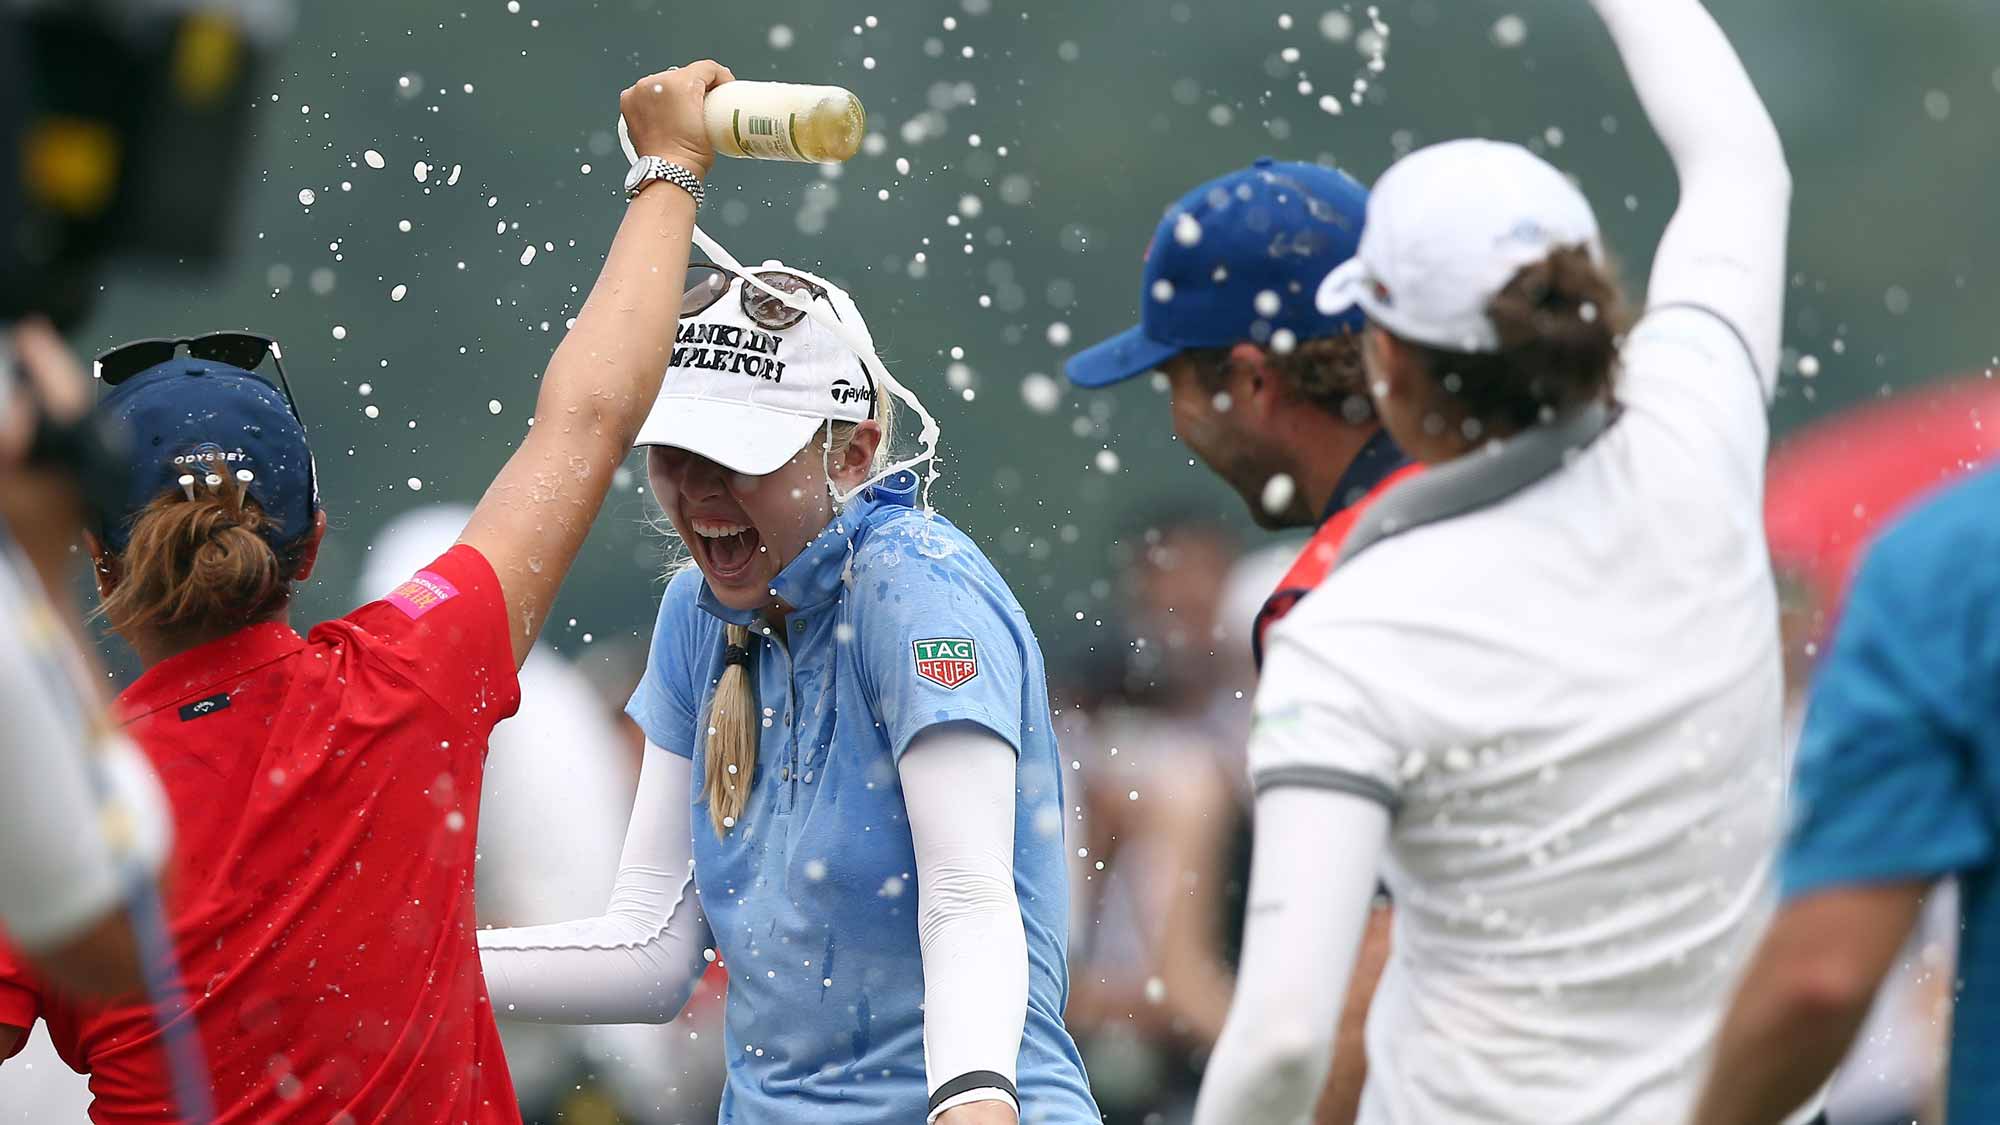 Jessica Korda of USA is splashed with water on the 18th hole after winning the Sime Darby LPGA in the final round of the Sime Darby LPGA Tour at Kuala Lumpur Golf & Country Club